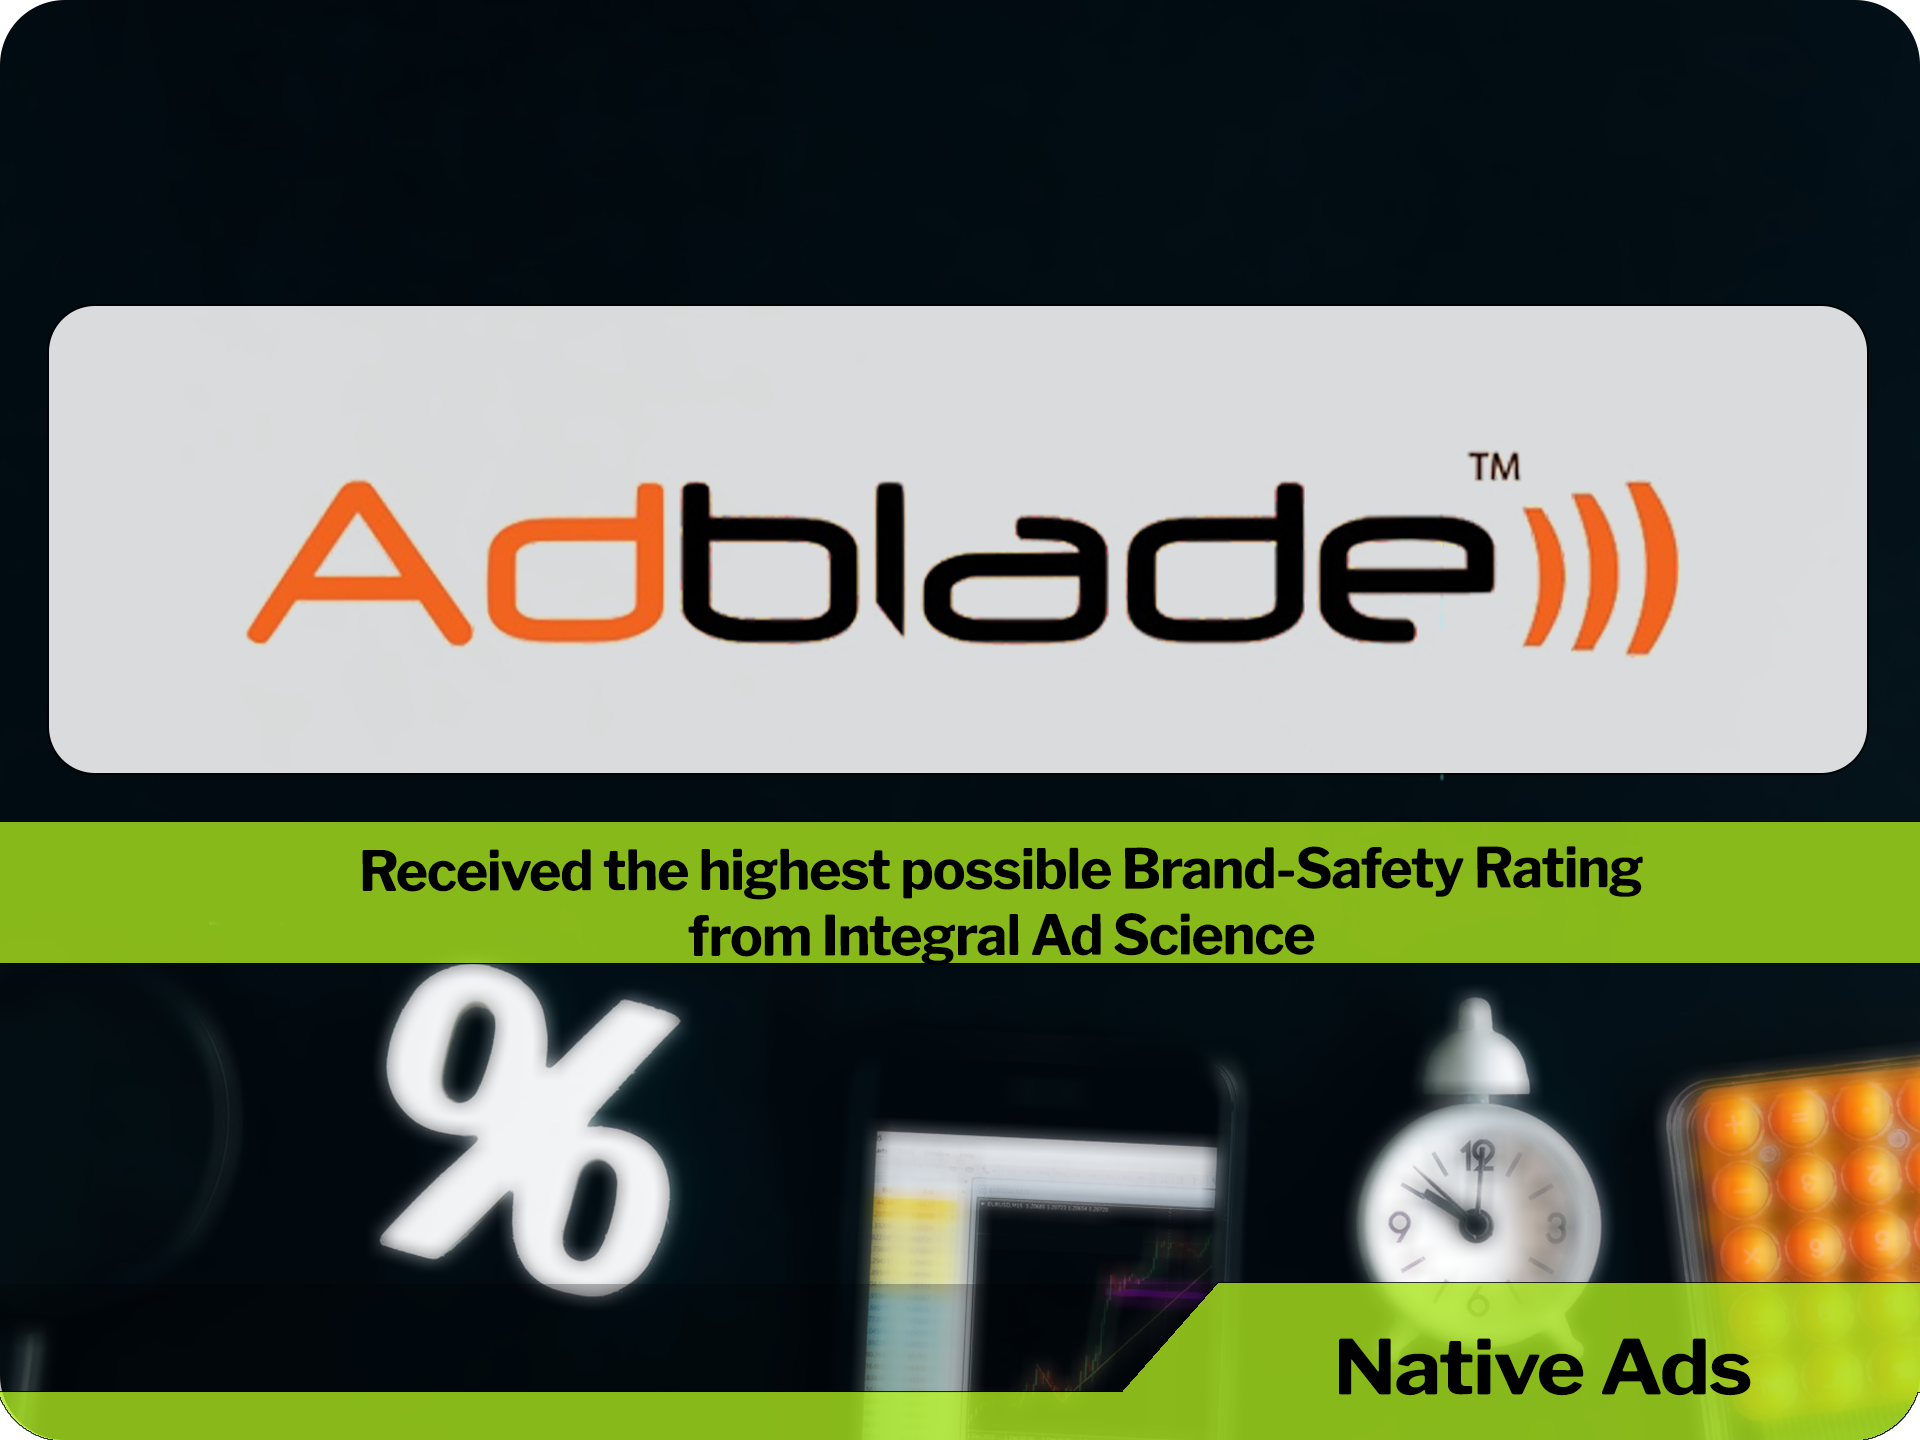 The Most Innovative Content-Style Ad Platform on the Web – AdBlade